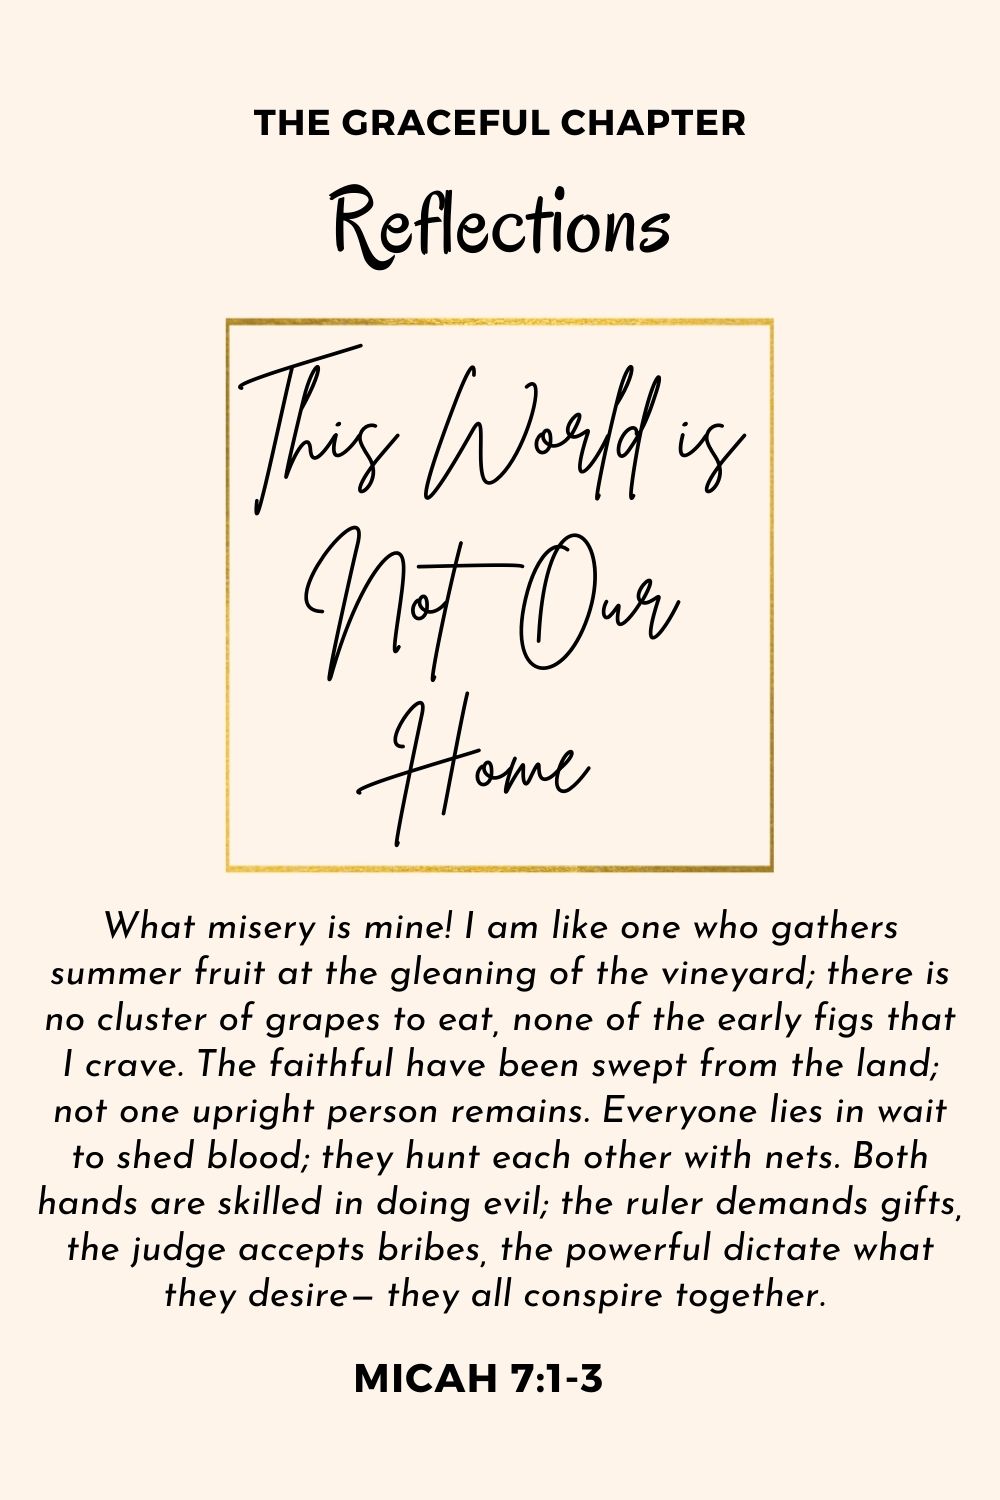 Reflection - Micah 7:1-3 - This World is Not Our Home